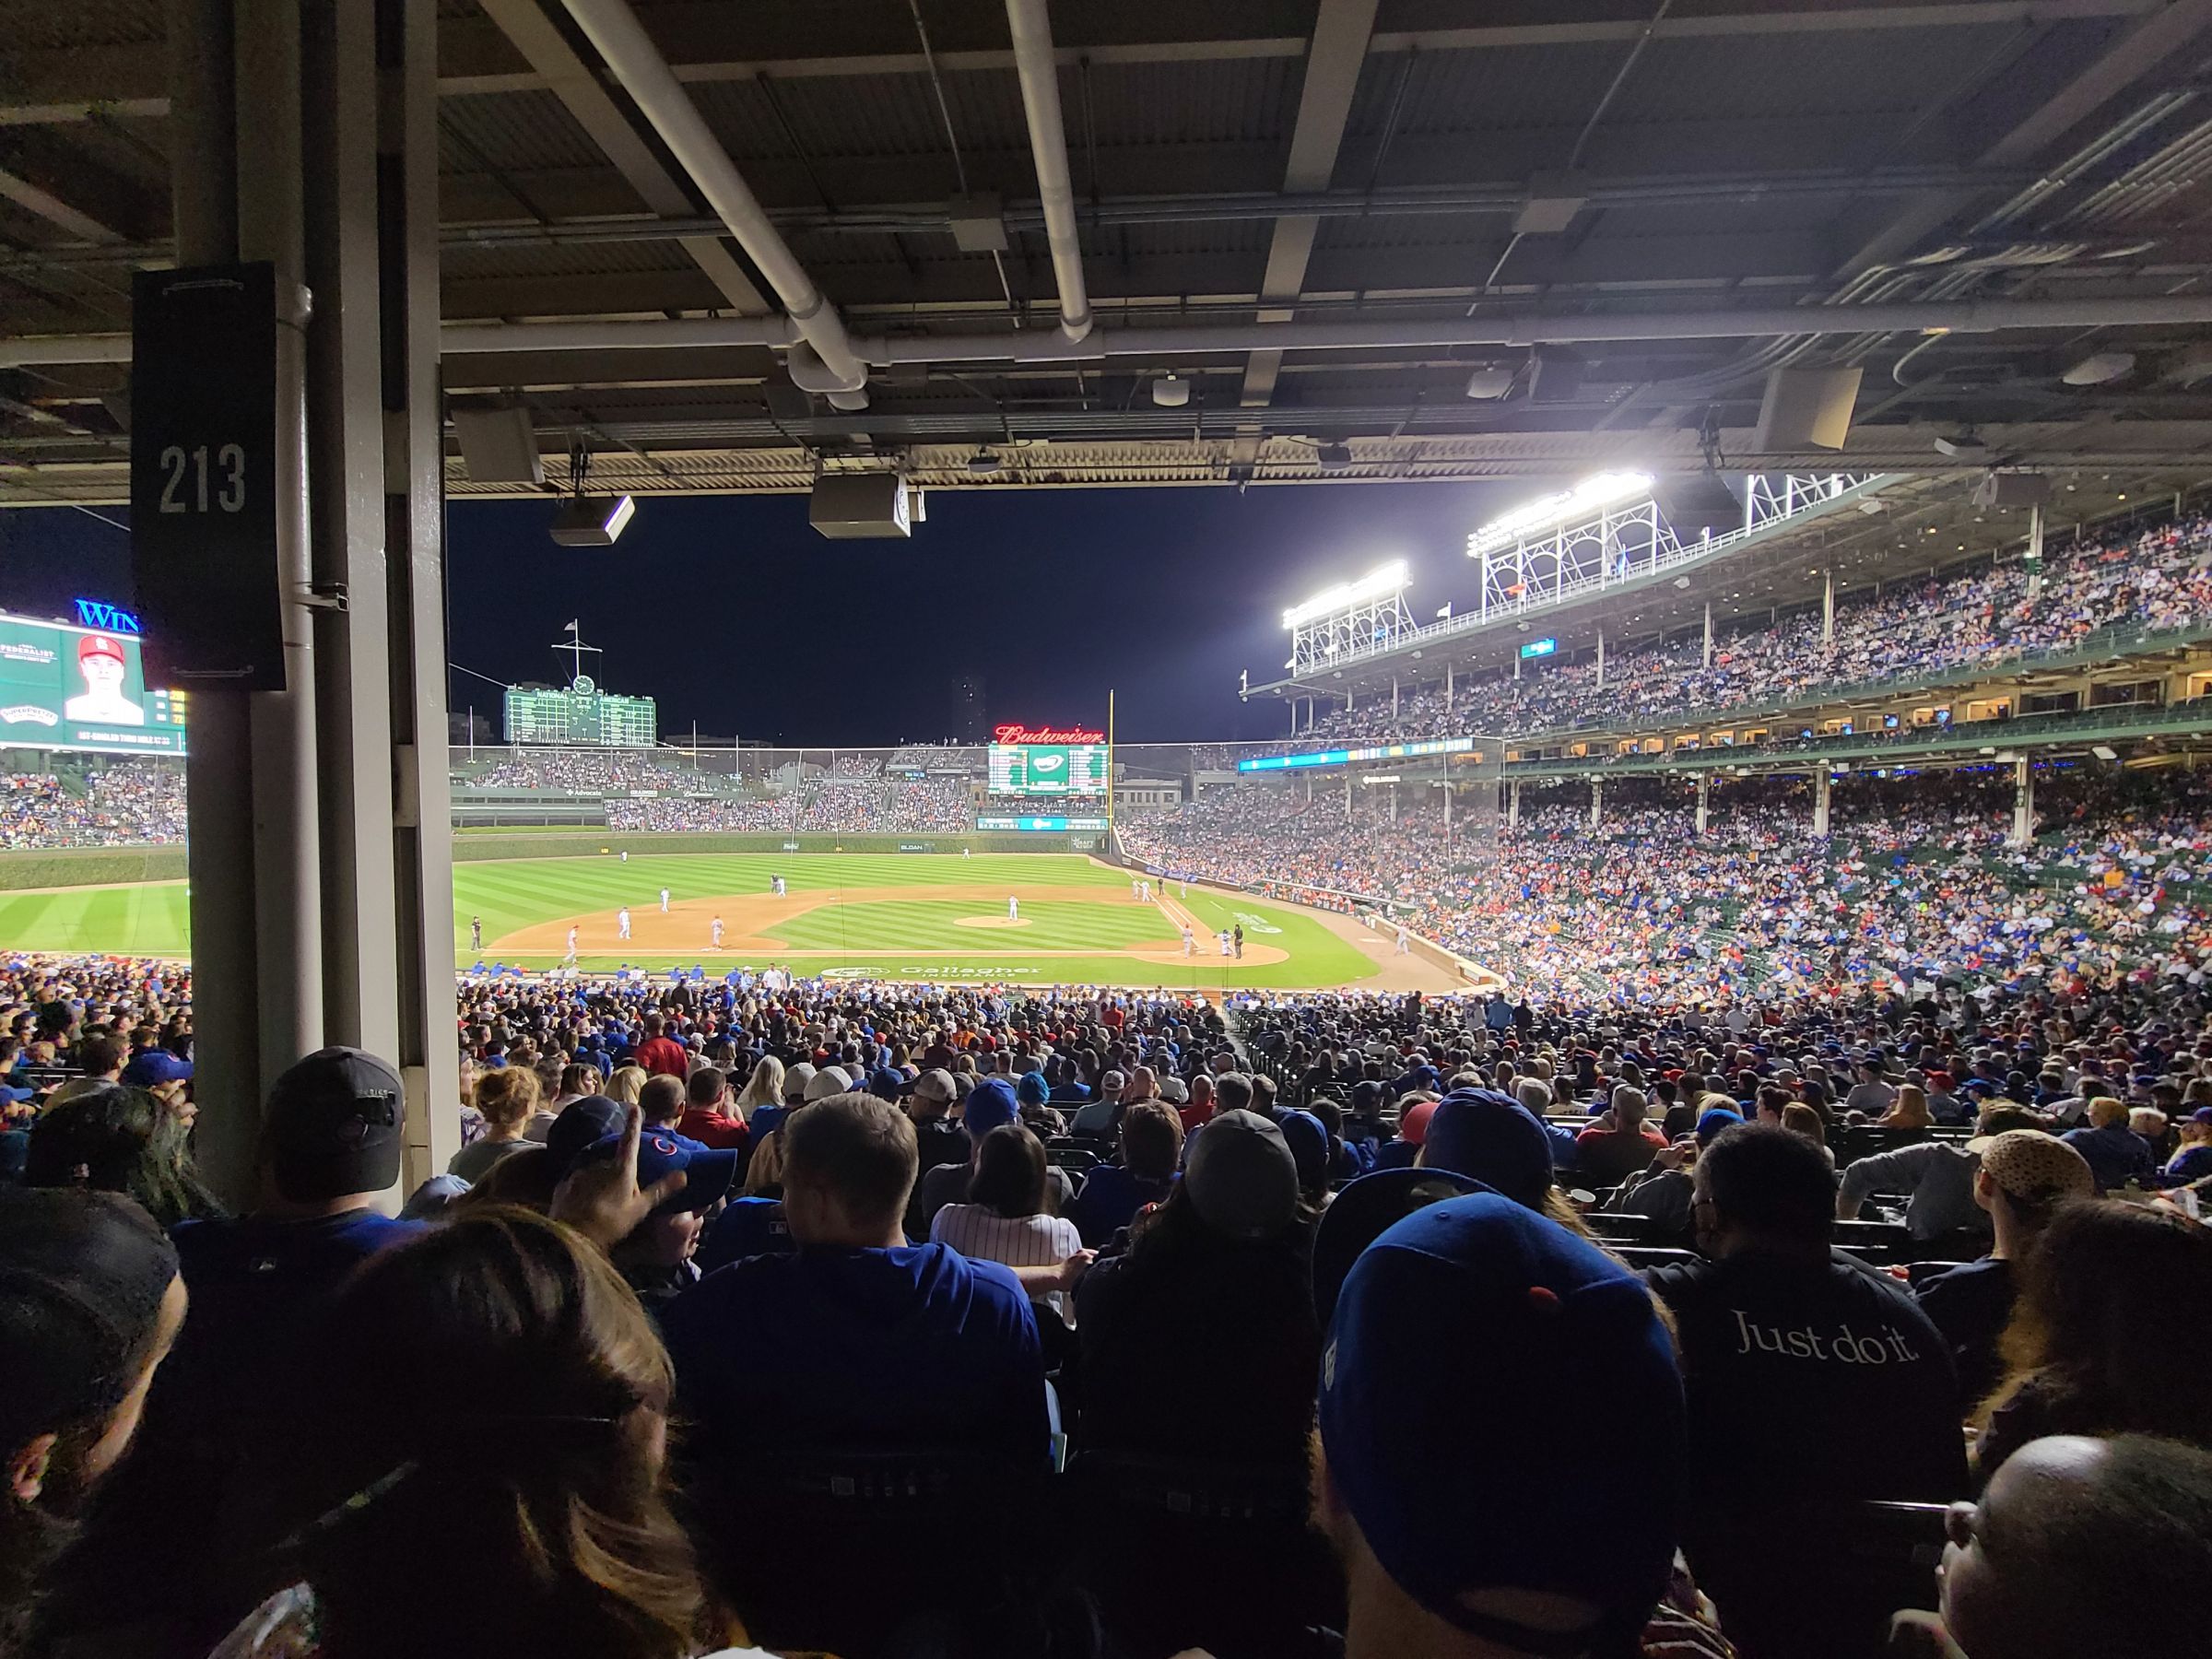 Section 213 At Wrigley Field Rateyourseats Com